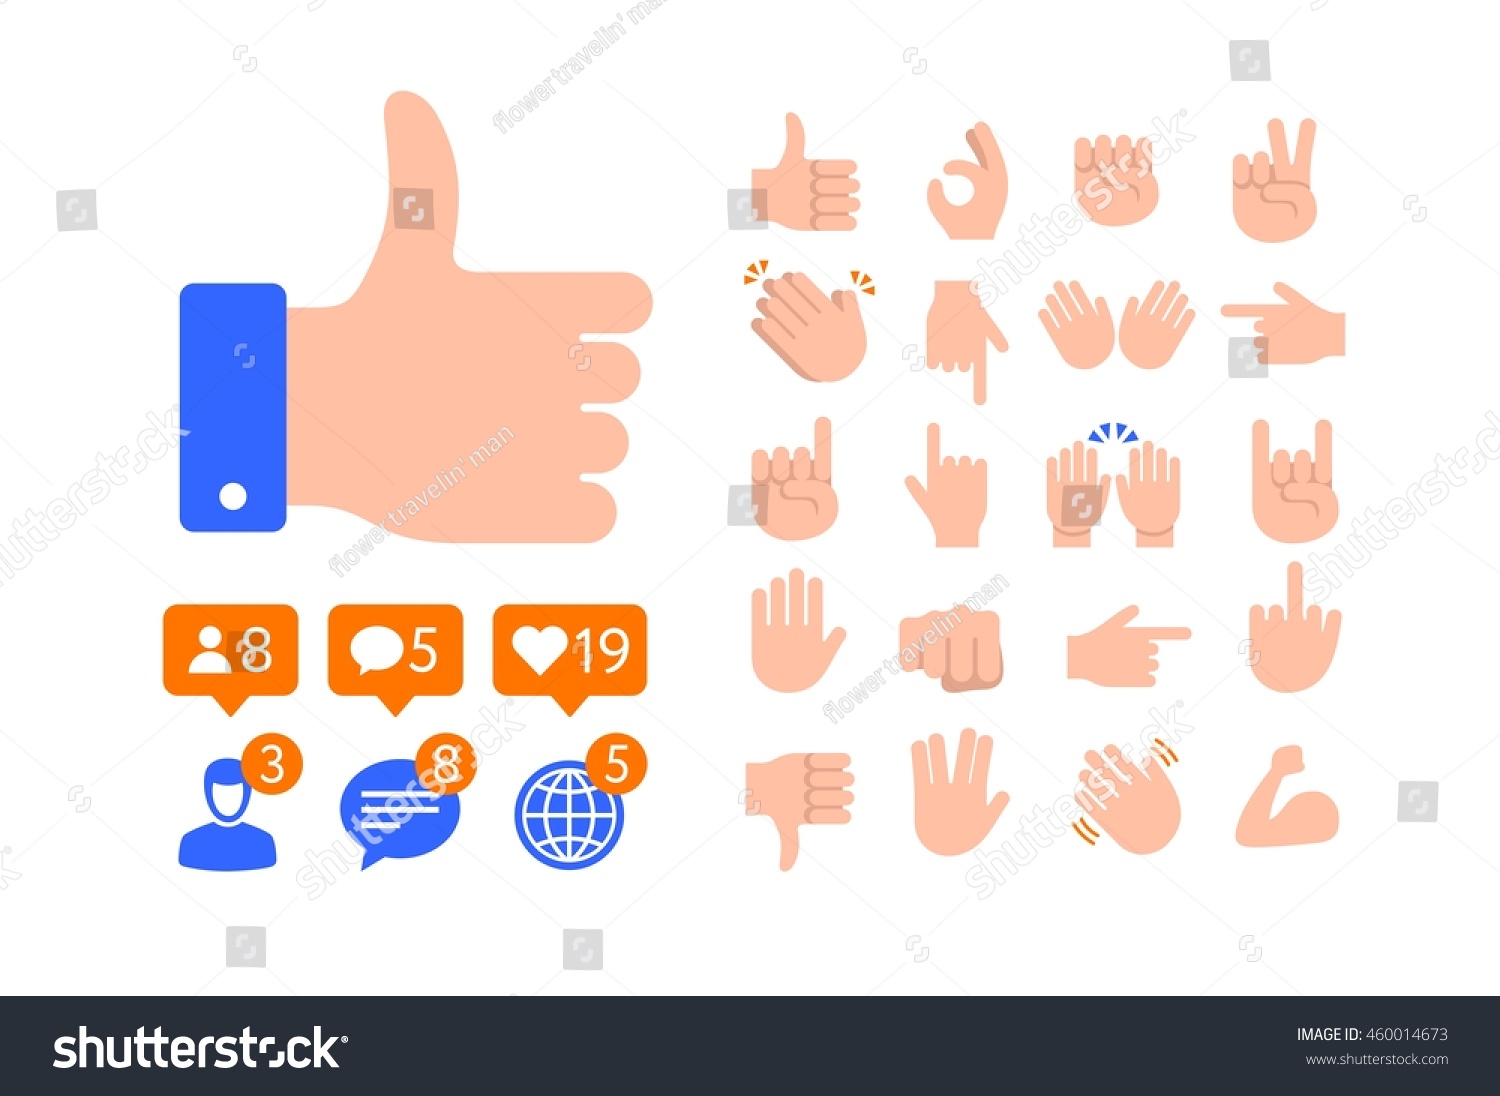 SVG of Flat design Thumb icon, Like symbol, Message and notification set. Abstract emoji emoticon hands collection svg